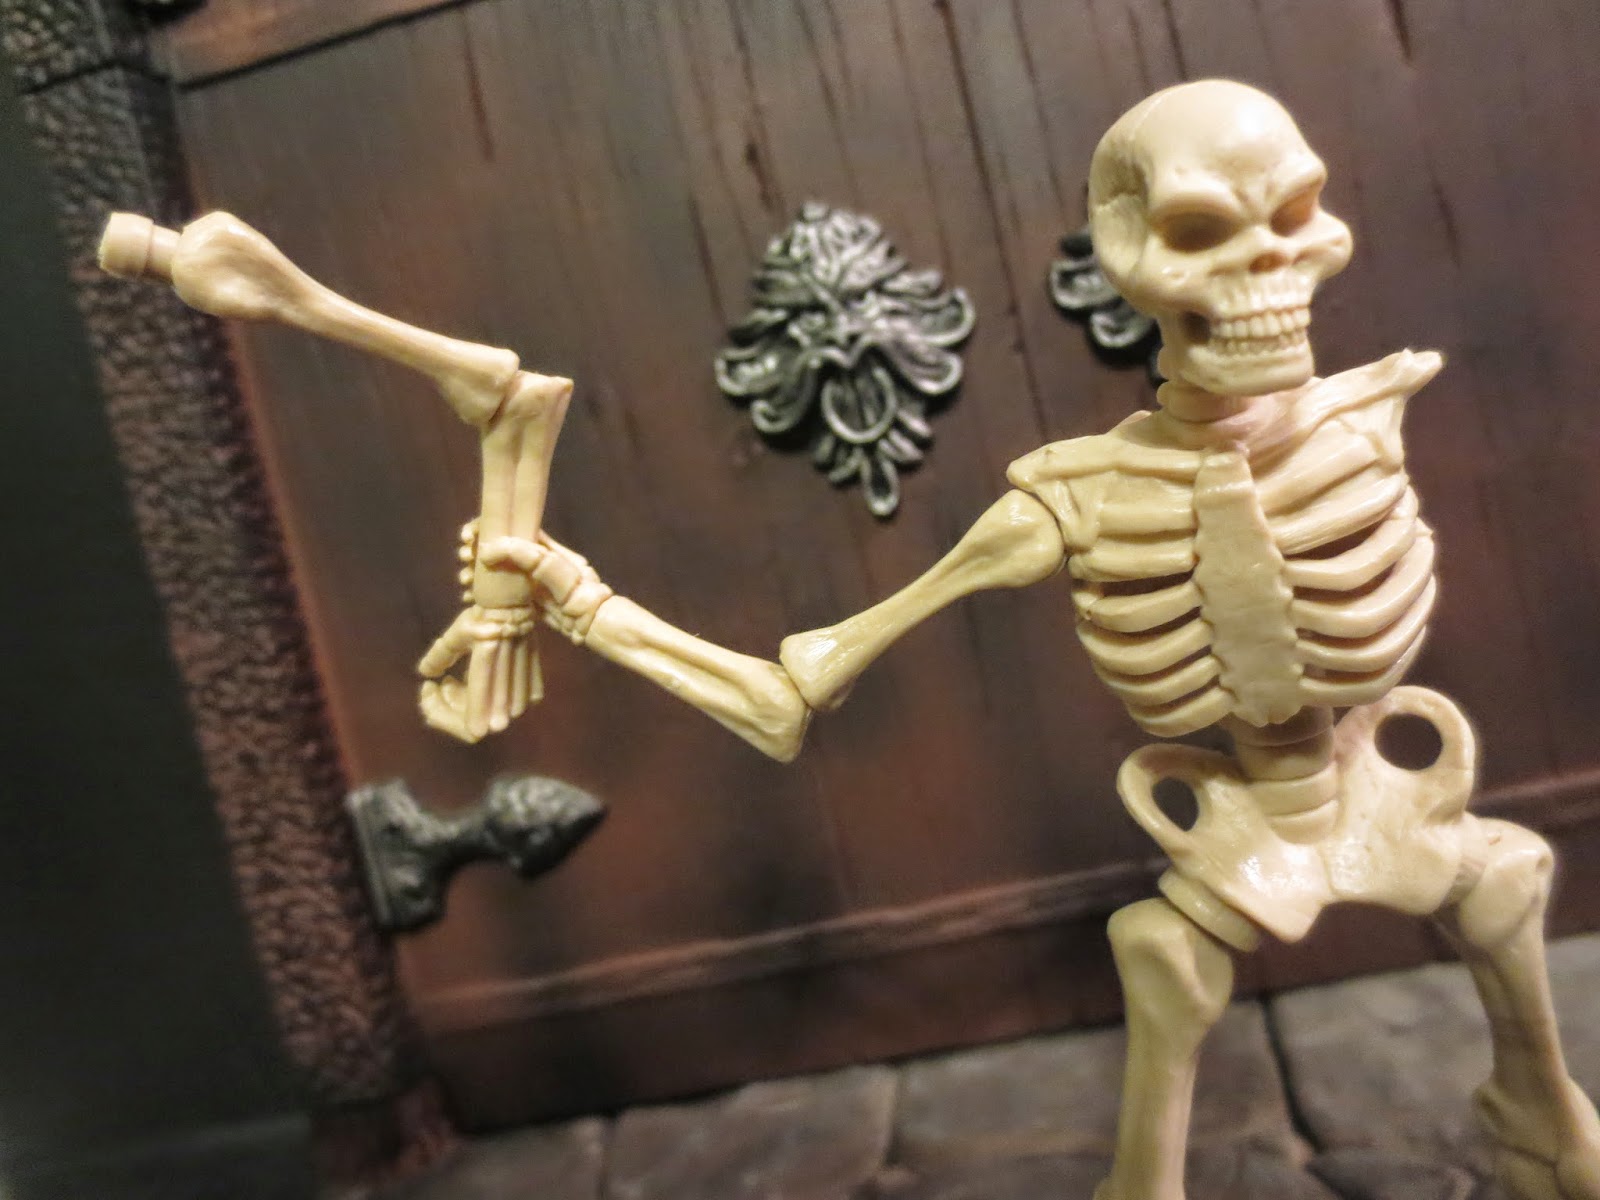 Action Figure Barbecue: Action Figure Review: Bone Titan Skeleton from  Skeleton Warriors by October Toys